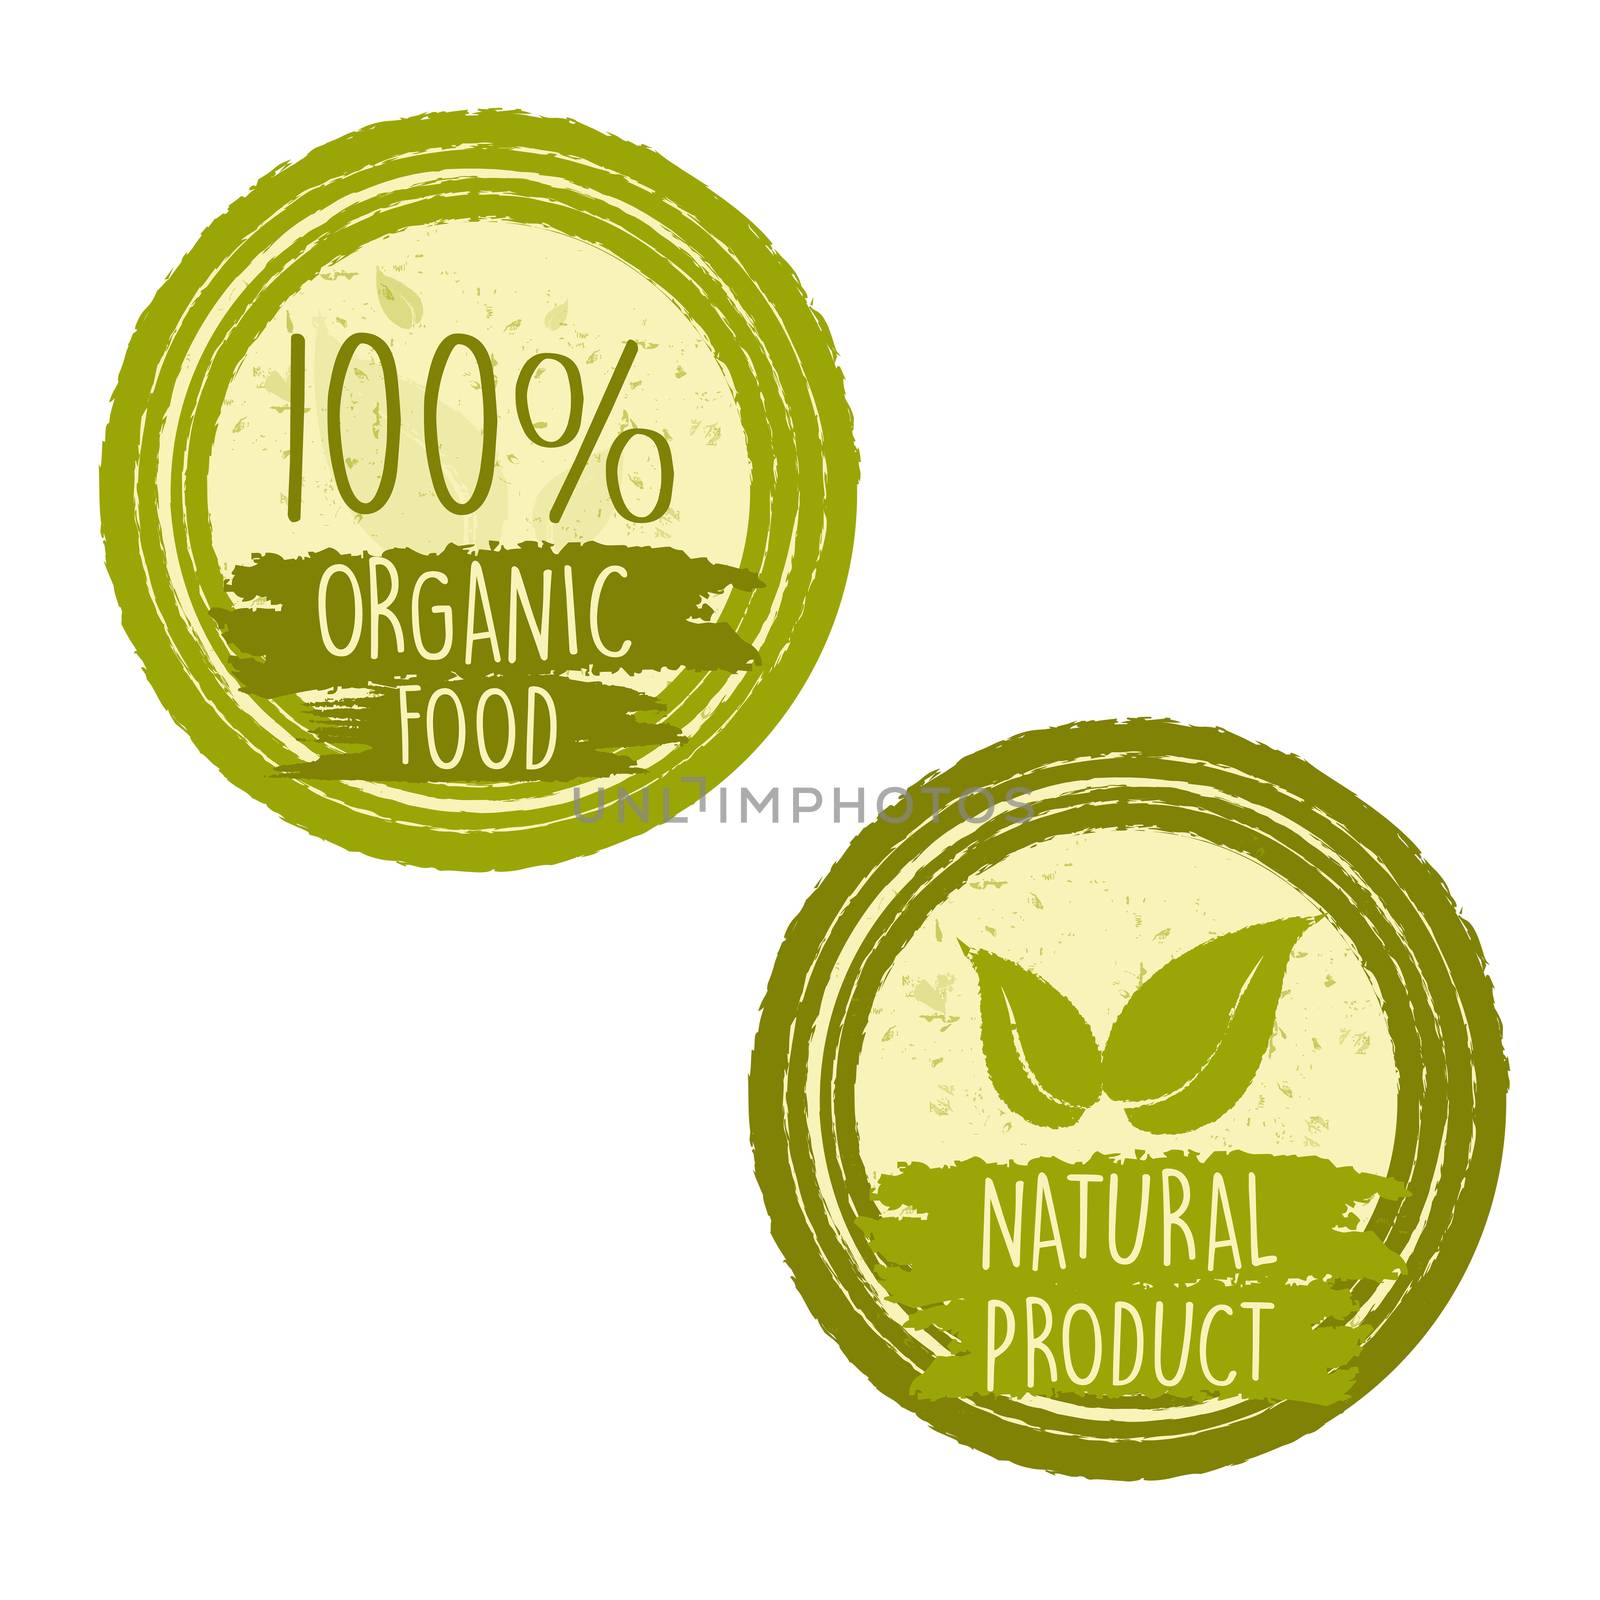 100 percent organic food and natural product with leaf signs in  by marinini